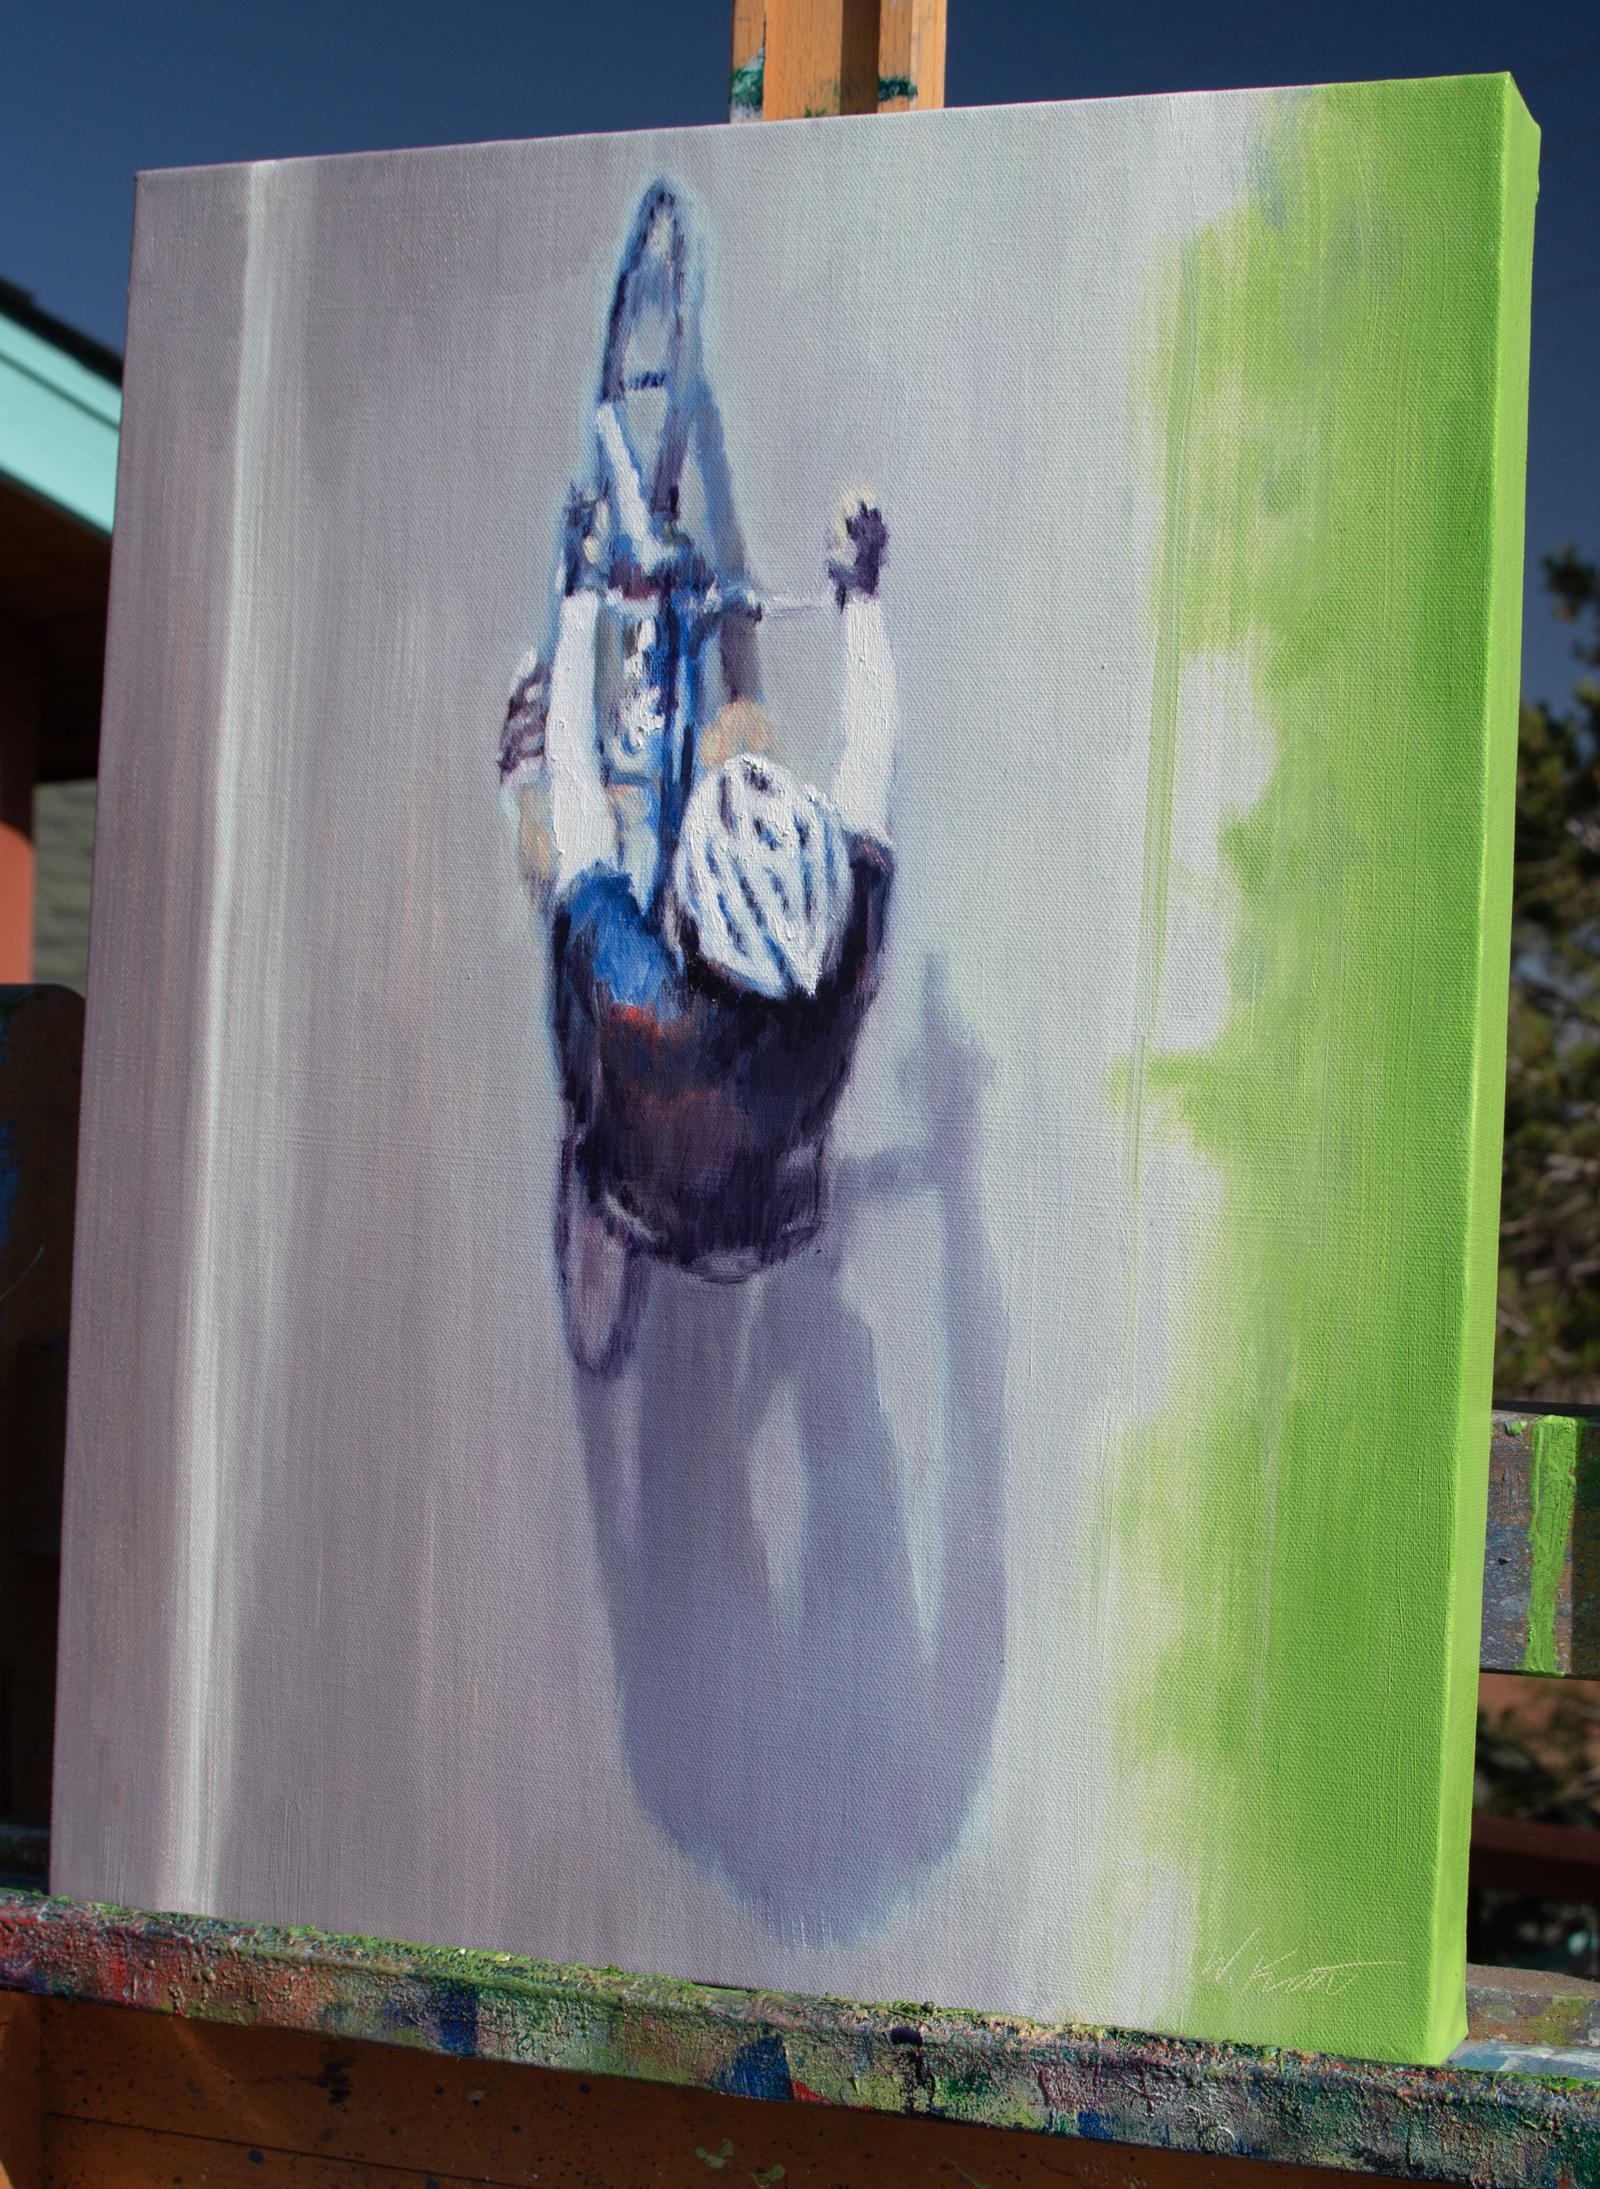 <p>Artist Comments<br>From an aerial perspective, the figurative painting of a bicycle rider establishes a flat space and a distinctive viewpoint. The combination of muted grays and vibrant greens adds depth and contrast to the scene, offering the